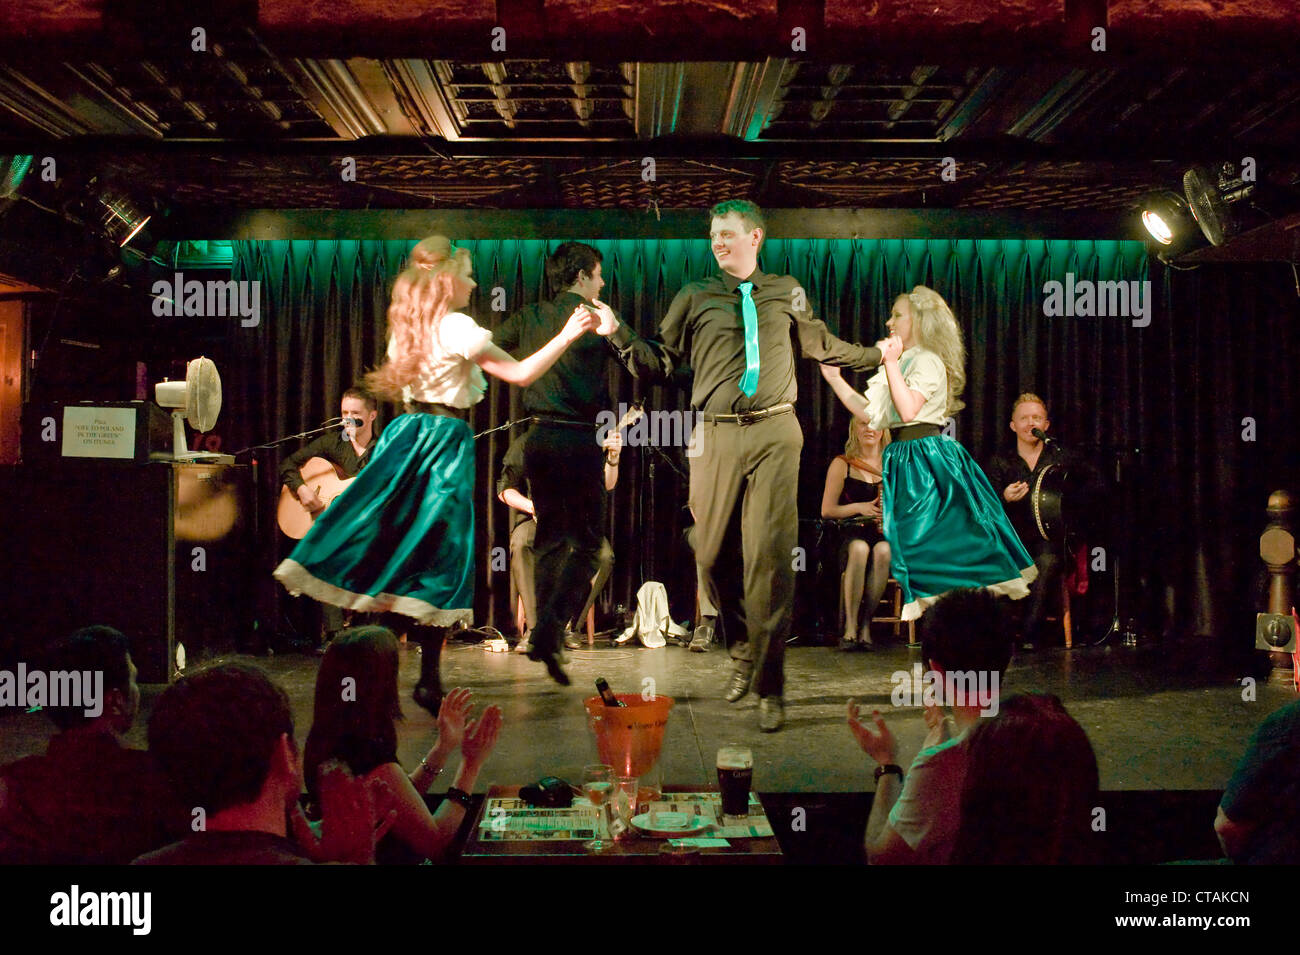 Members of the 'Celtic Rhythm Professional Irish Dancers' on stage with backing music by 'Puca' at the Arlington Hotel, Dublin. Stock Photo